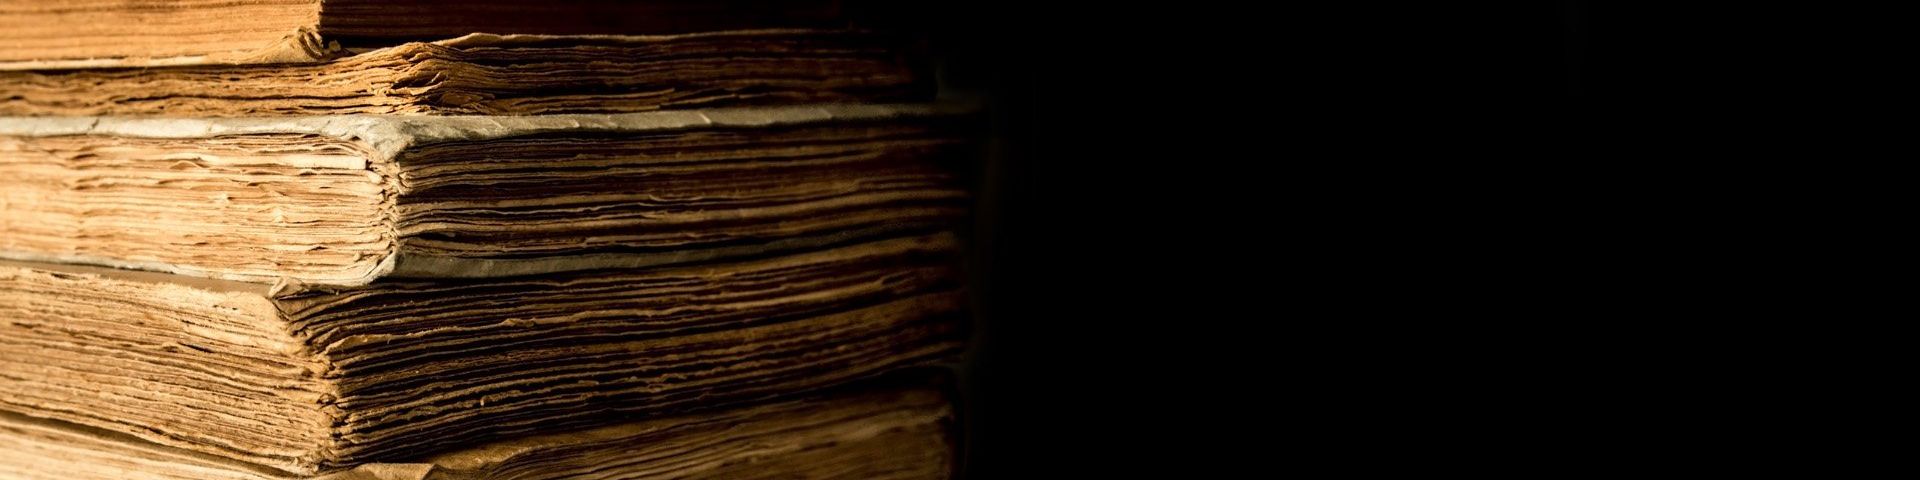 On the left, a stack of very old books, viewed from the leaves not spine. On the right, a black background.